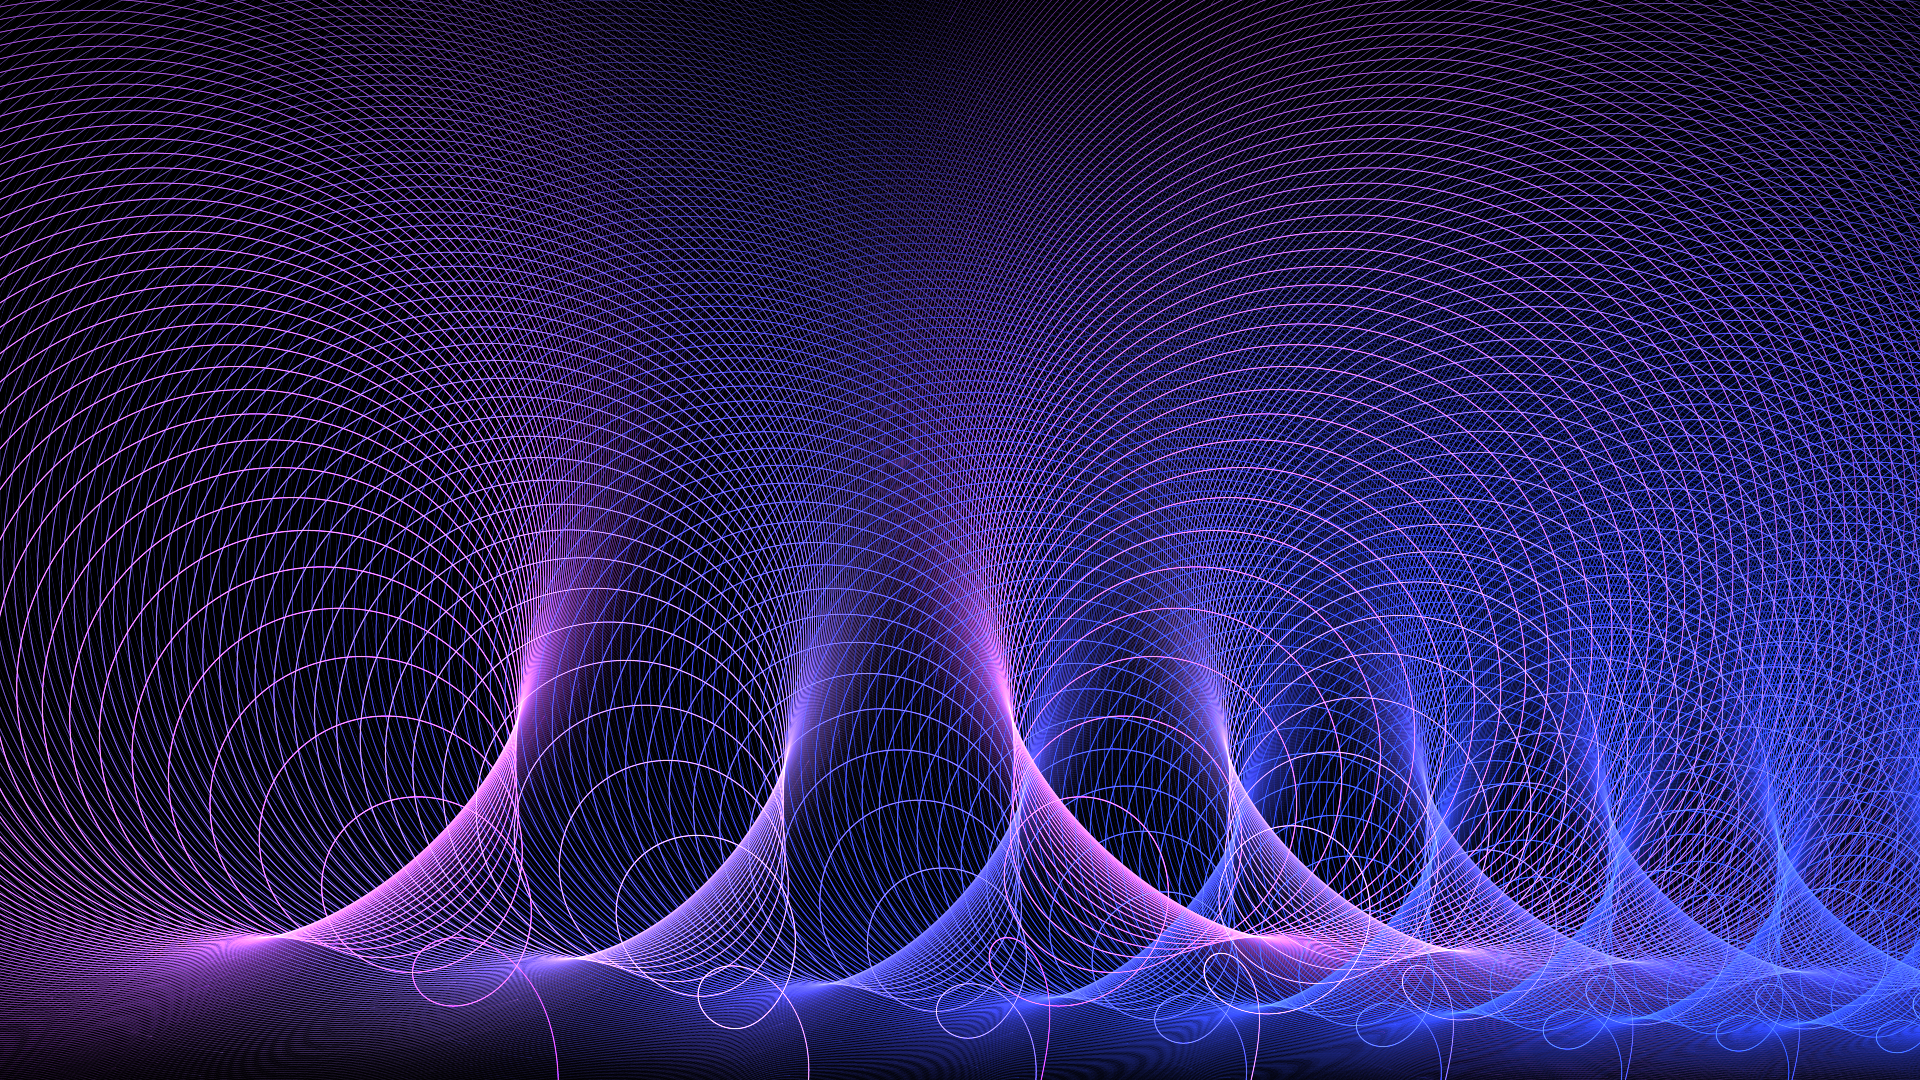 Acoustic Wave HD Wallpaper | Background Image | 1920x1080